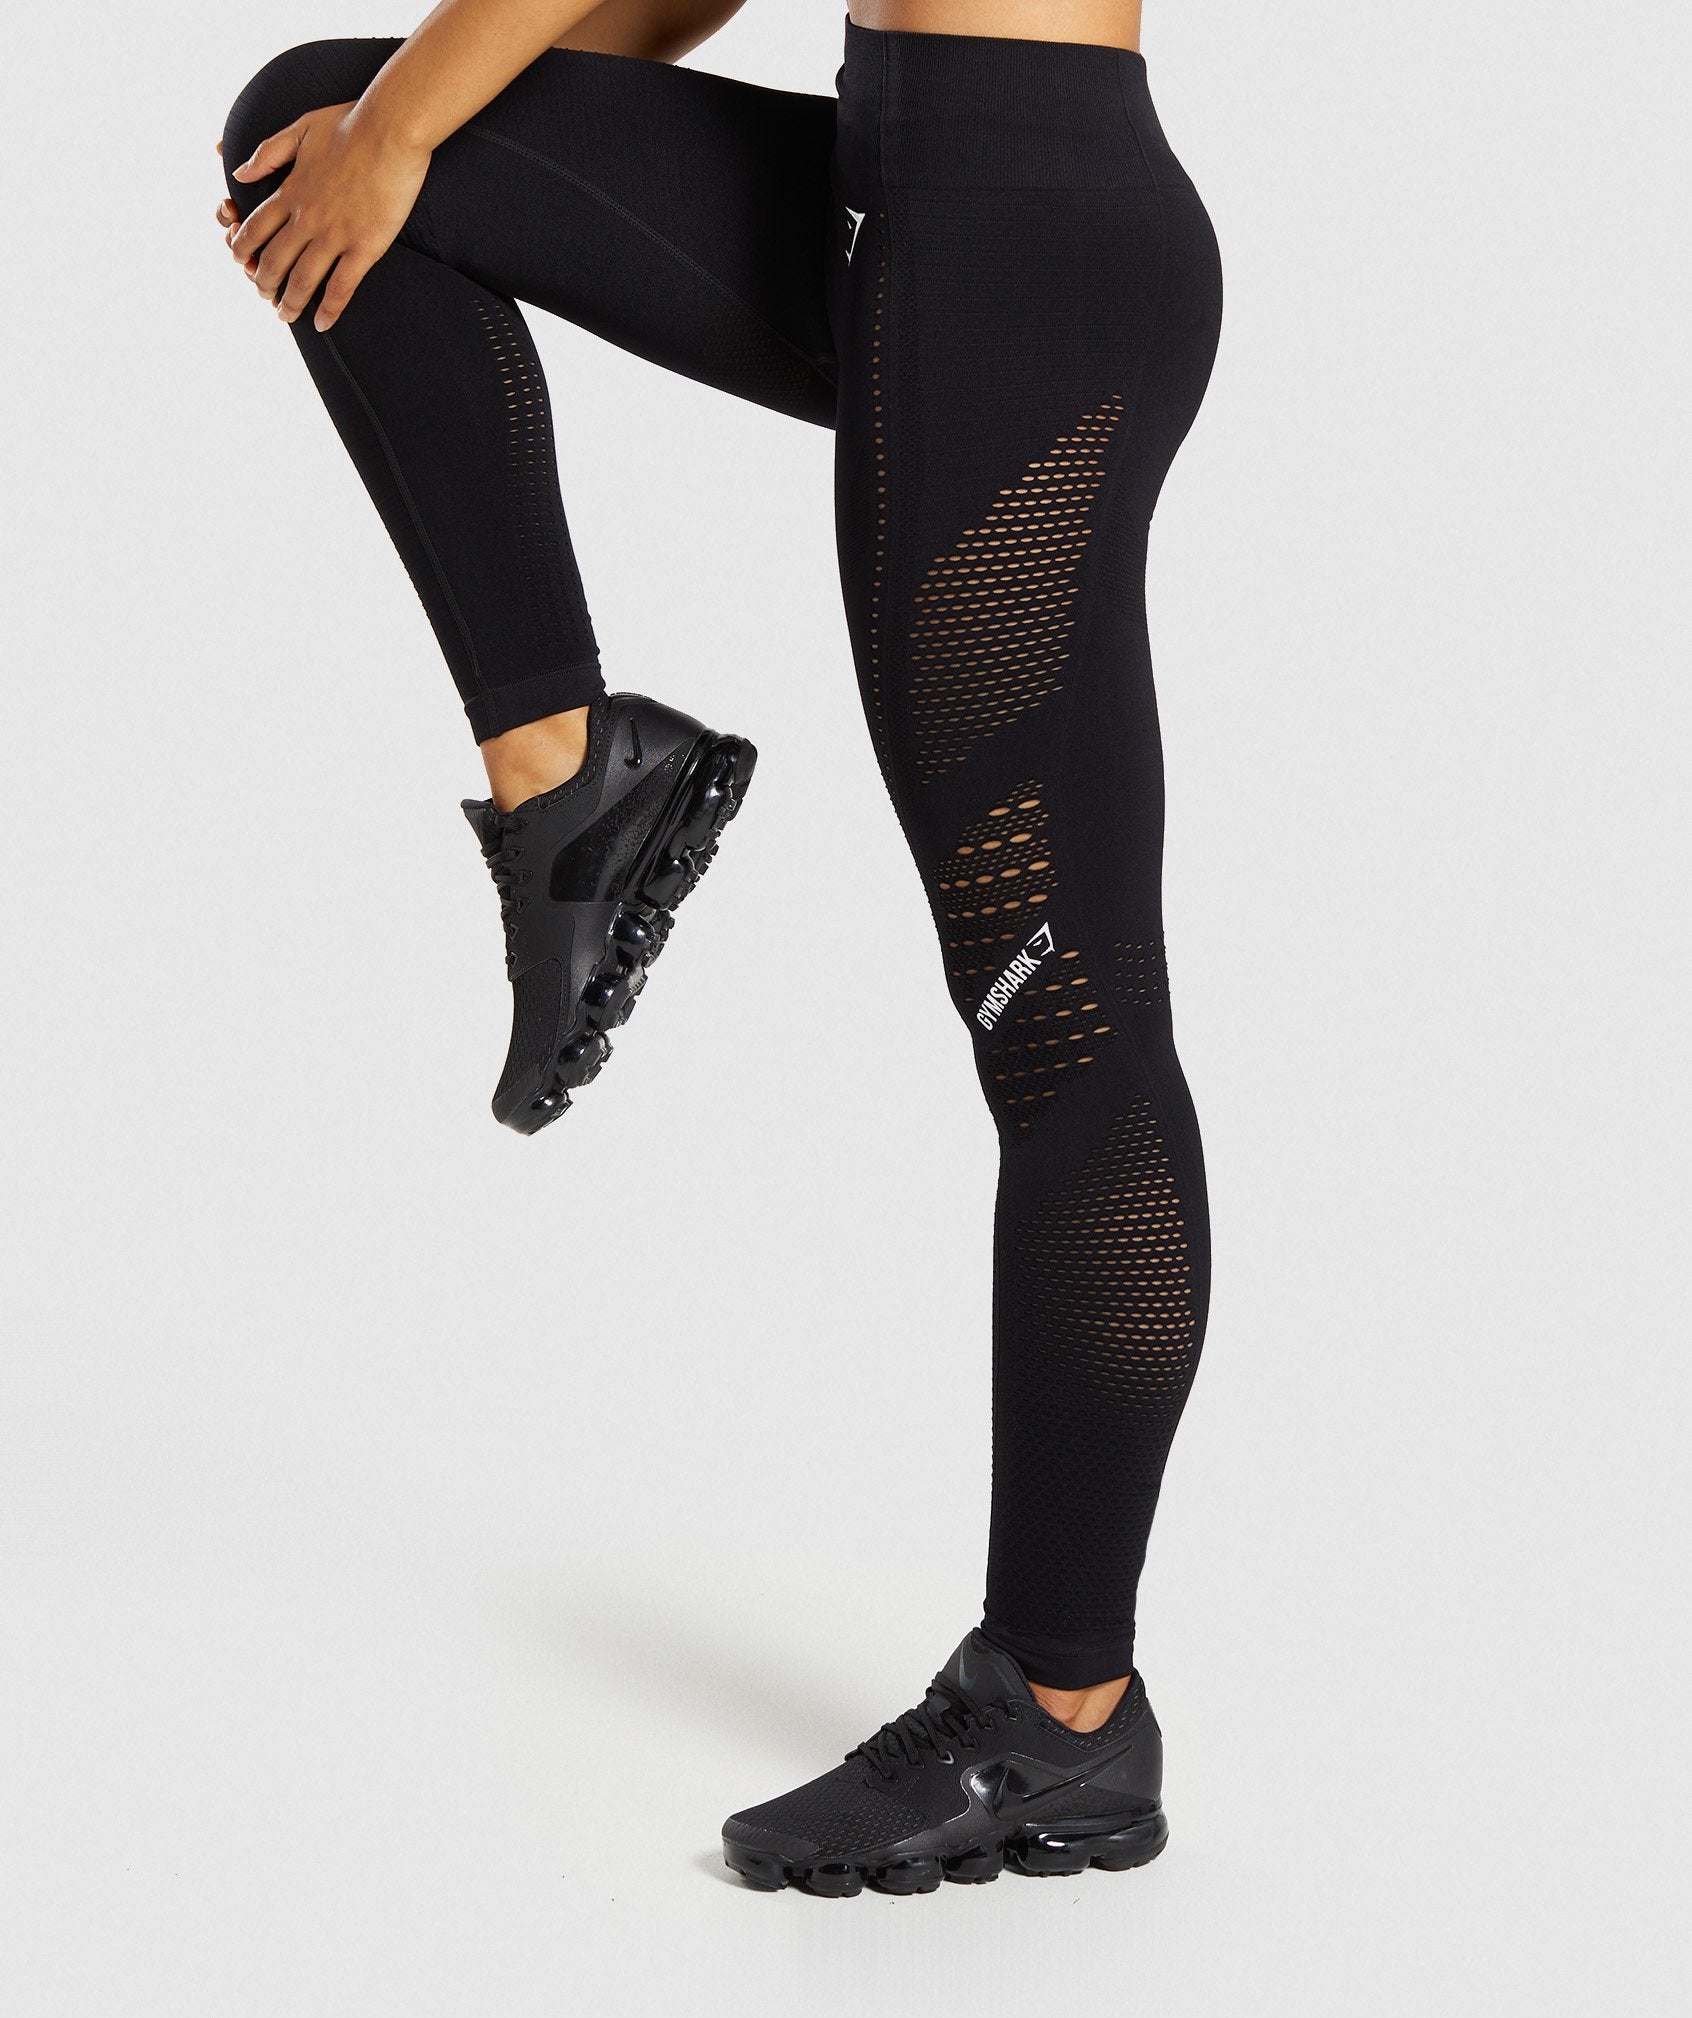 Flawless Knit Tights in Black